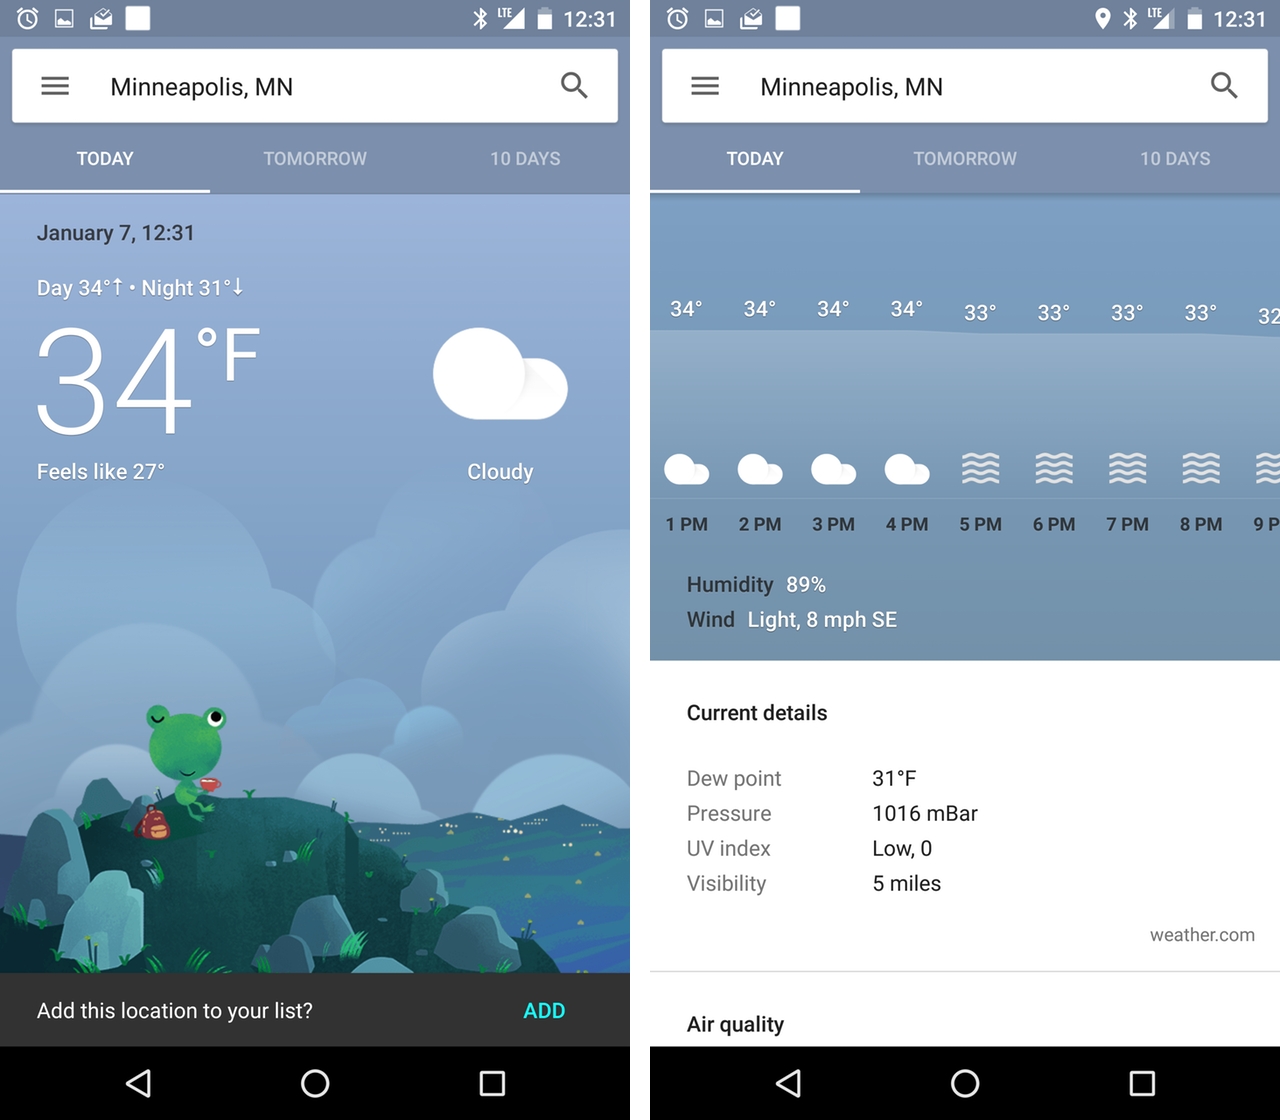 New, colourful weather cards start making their way into Google Now